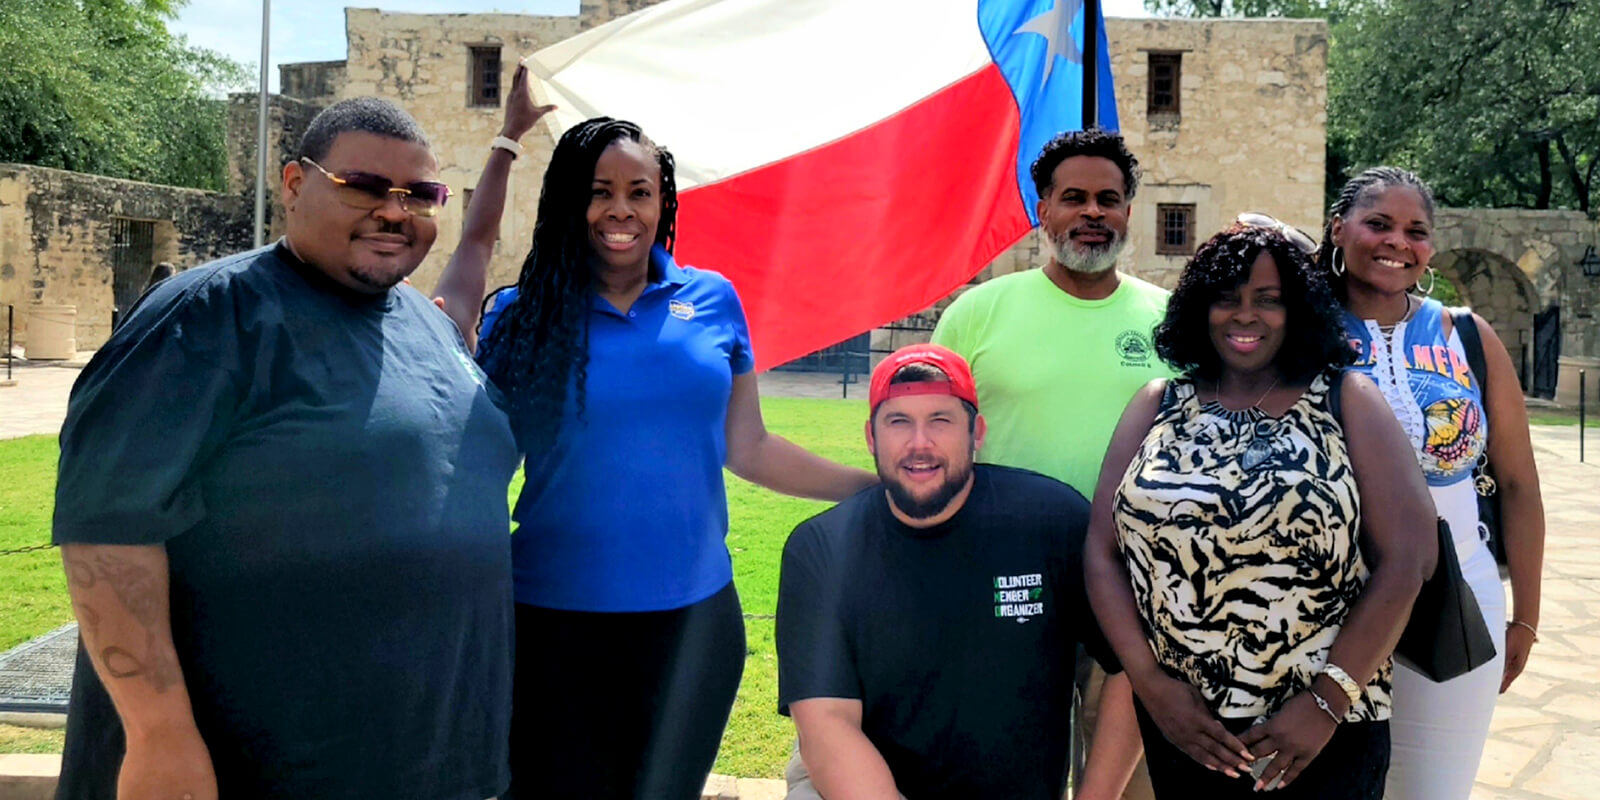 Blitz held to keep AFSCME’s voice strong in local worker advocacy in San Antonio